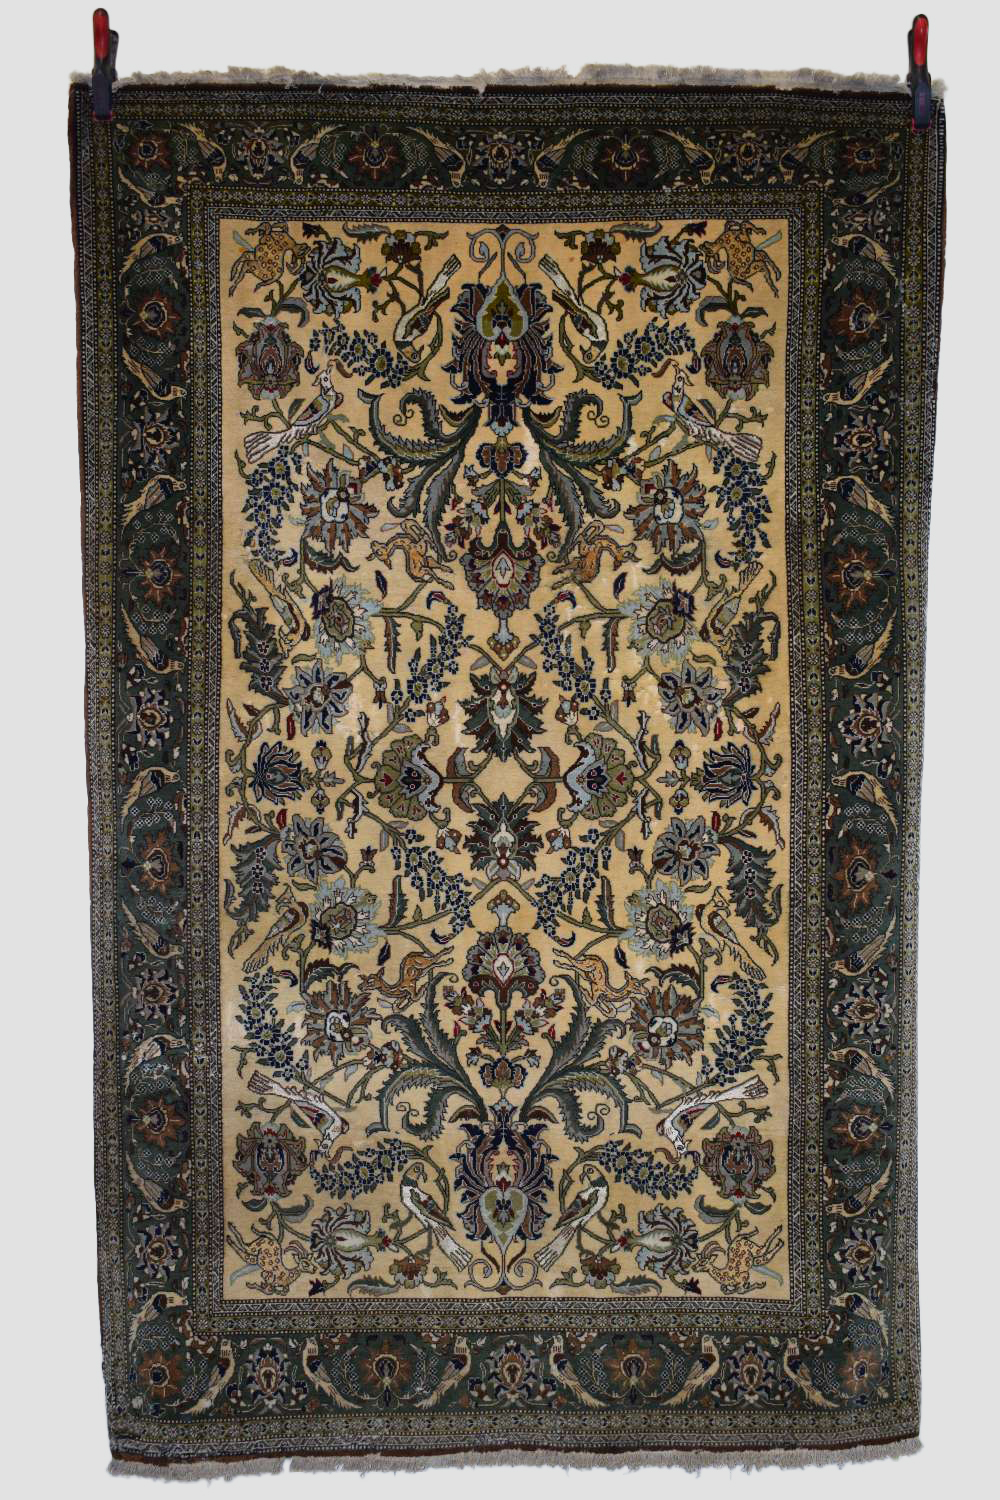 Qum part silk rug, south central Persia, mid-20th century, 6ft. 11in. X 4ft. 5in. 2.11m. X 1.35m.